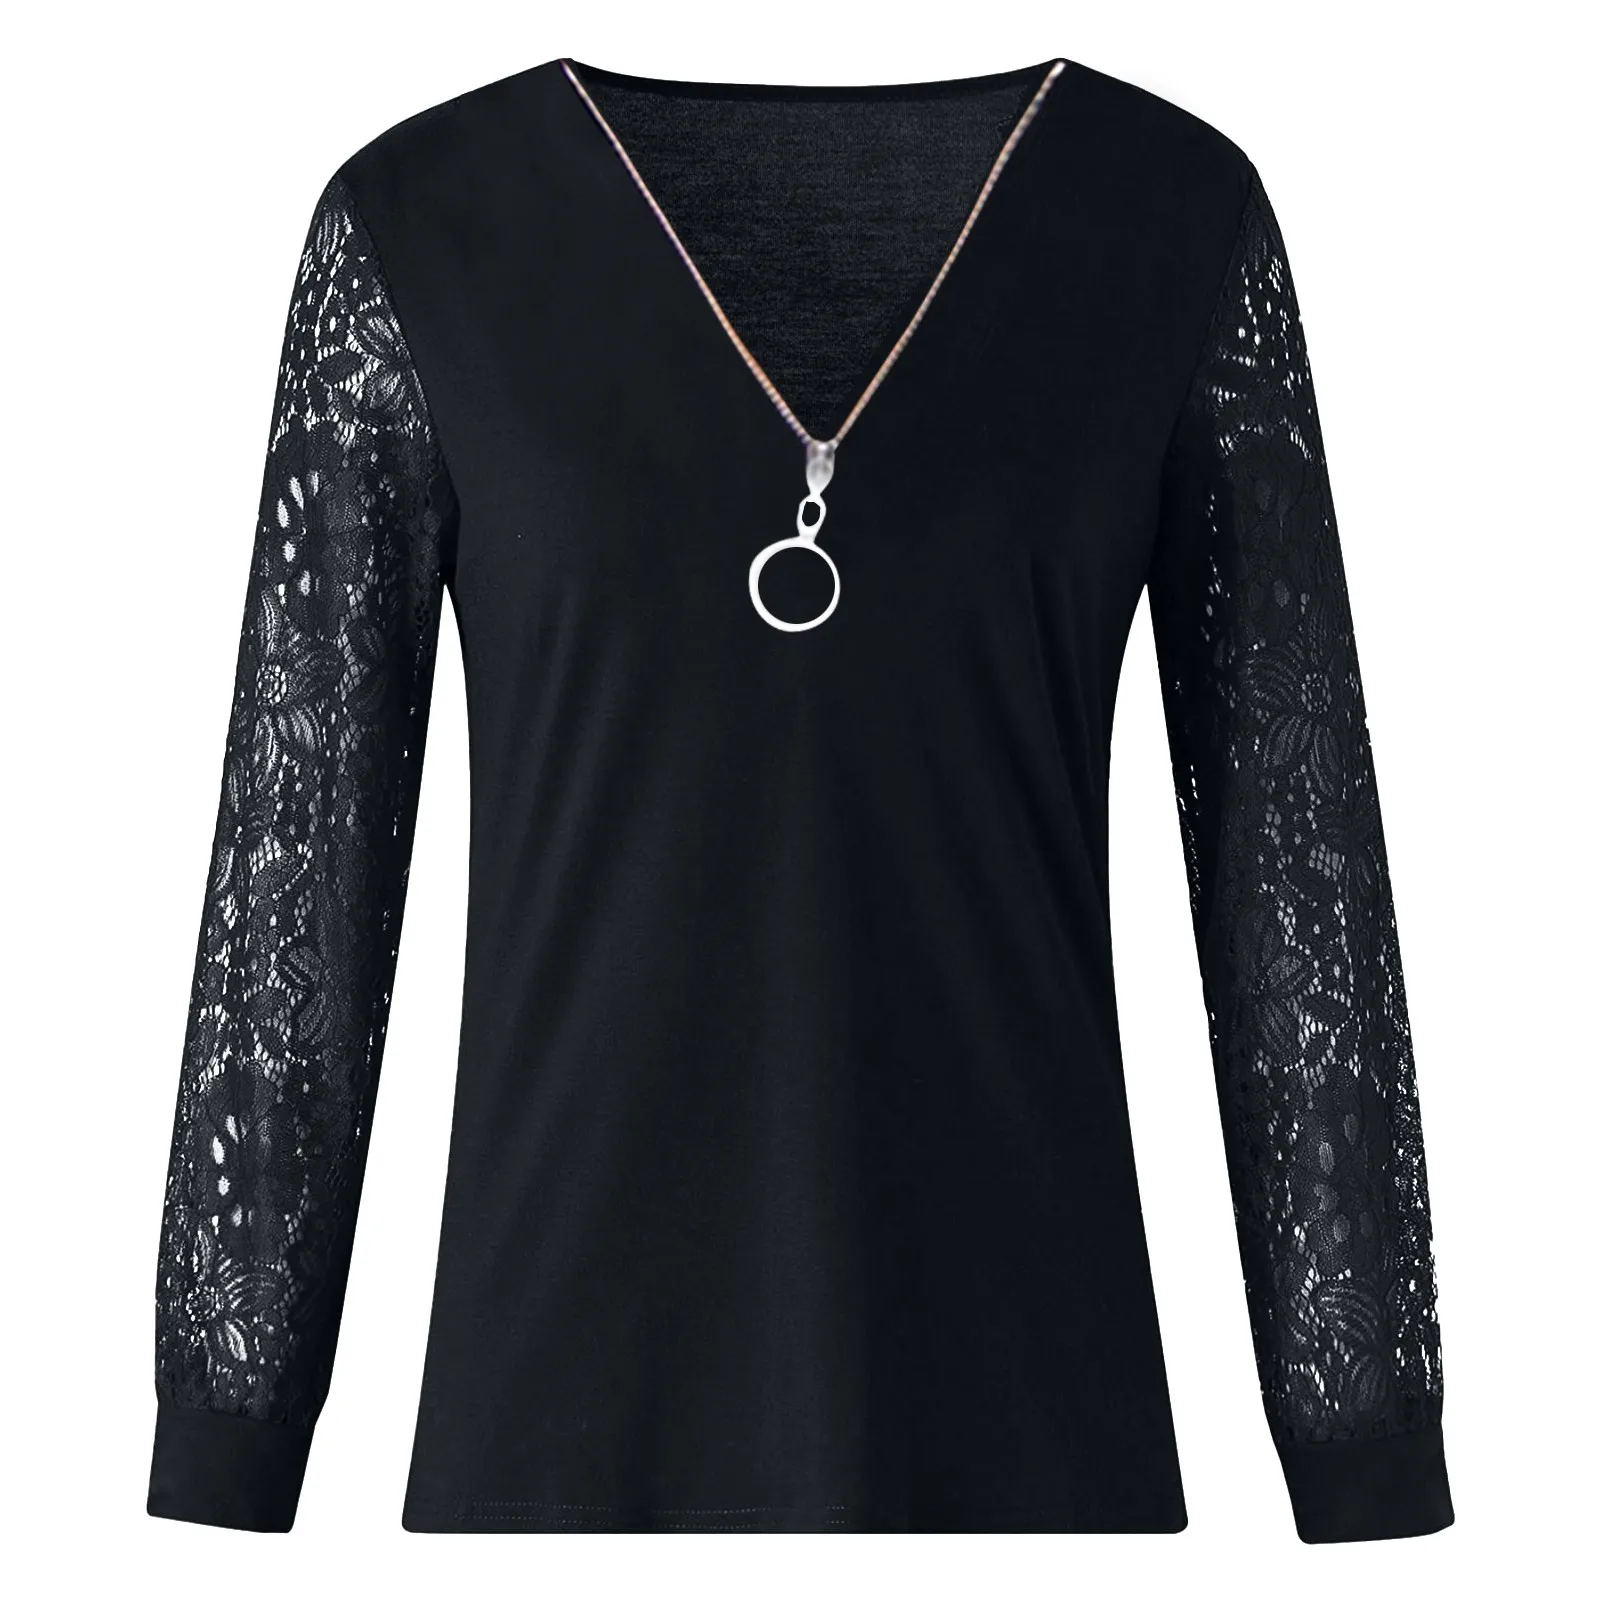 Fashion Lace Mesh Blouse Shirt Loose Sexy Zipper V-Neck Tops Winter Casual Ladies Tops Female Women Long Sleeve Blusas Pullover long sleeve blouse